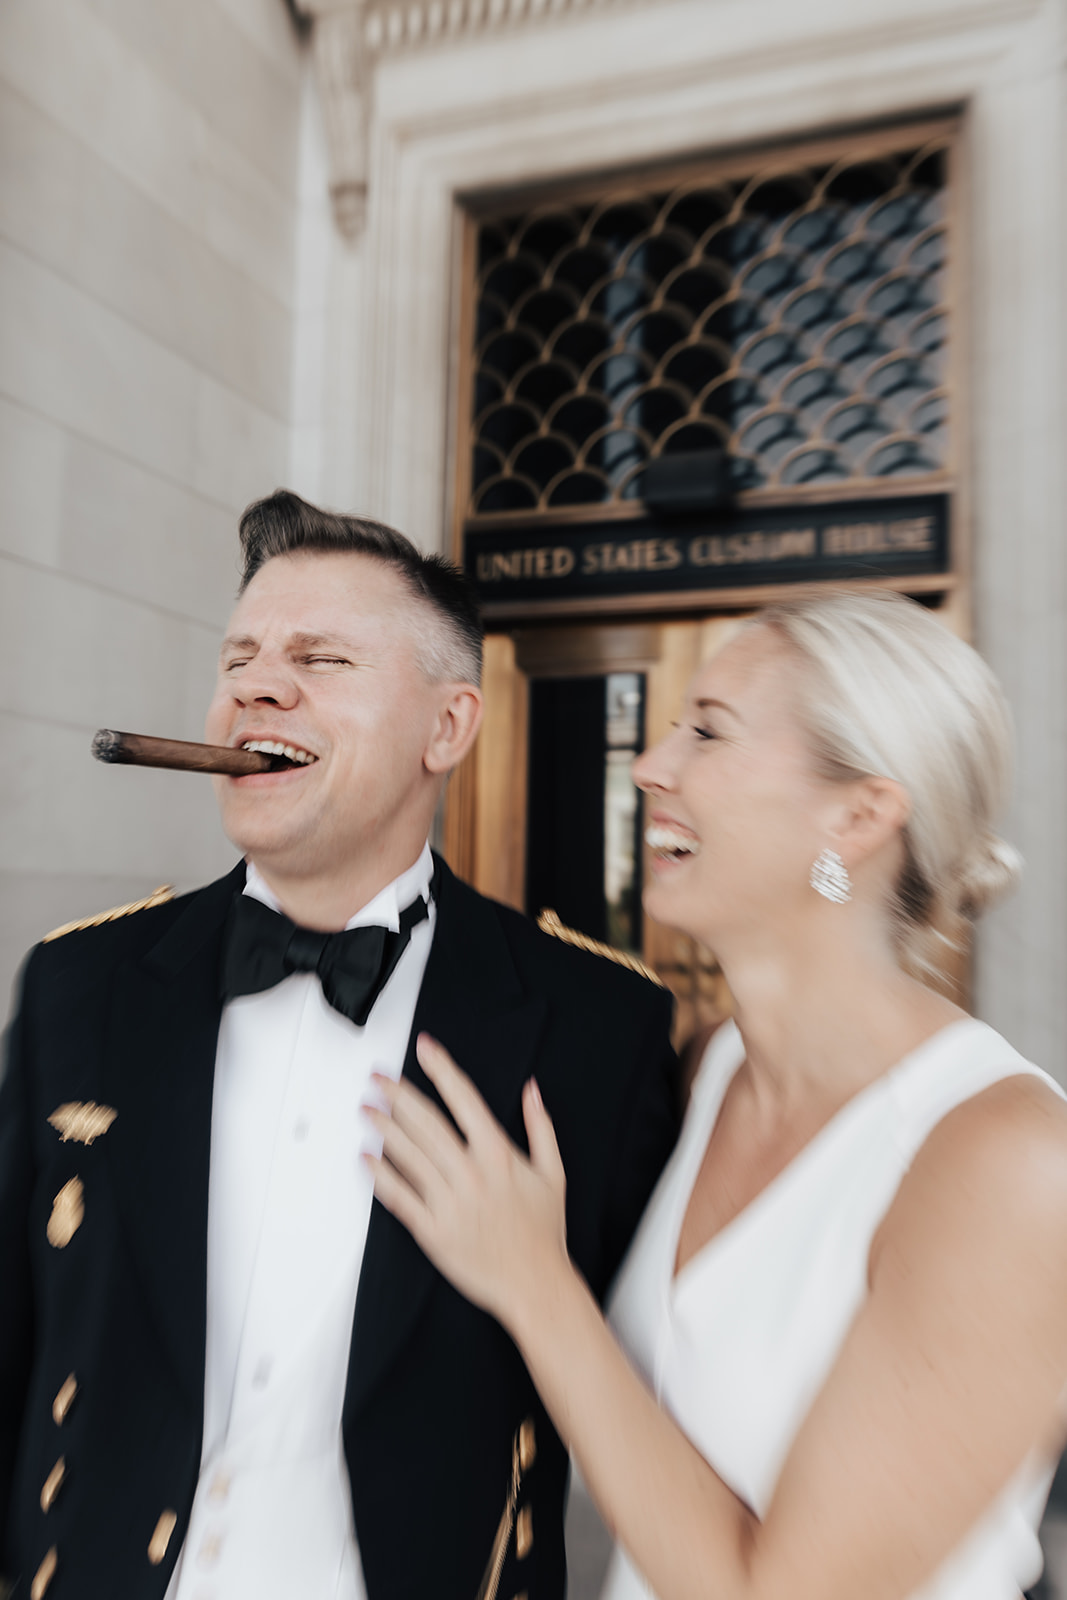 Man in military uniform and cigar in mouth next to woman in white dress posing for anniversary photos